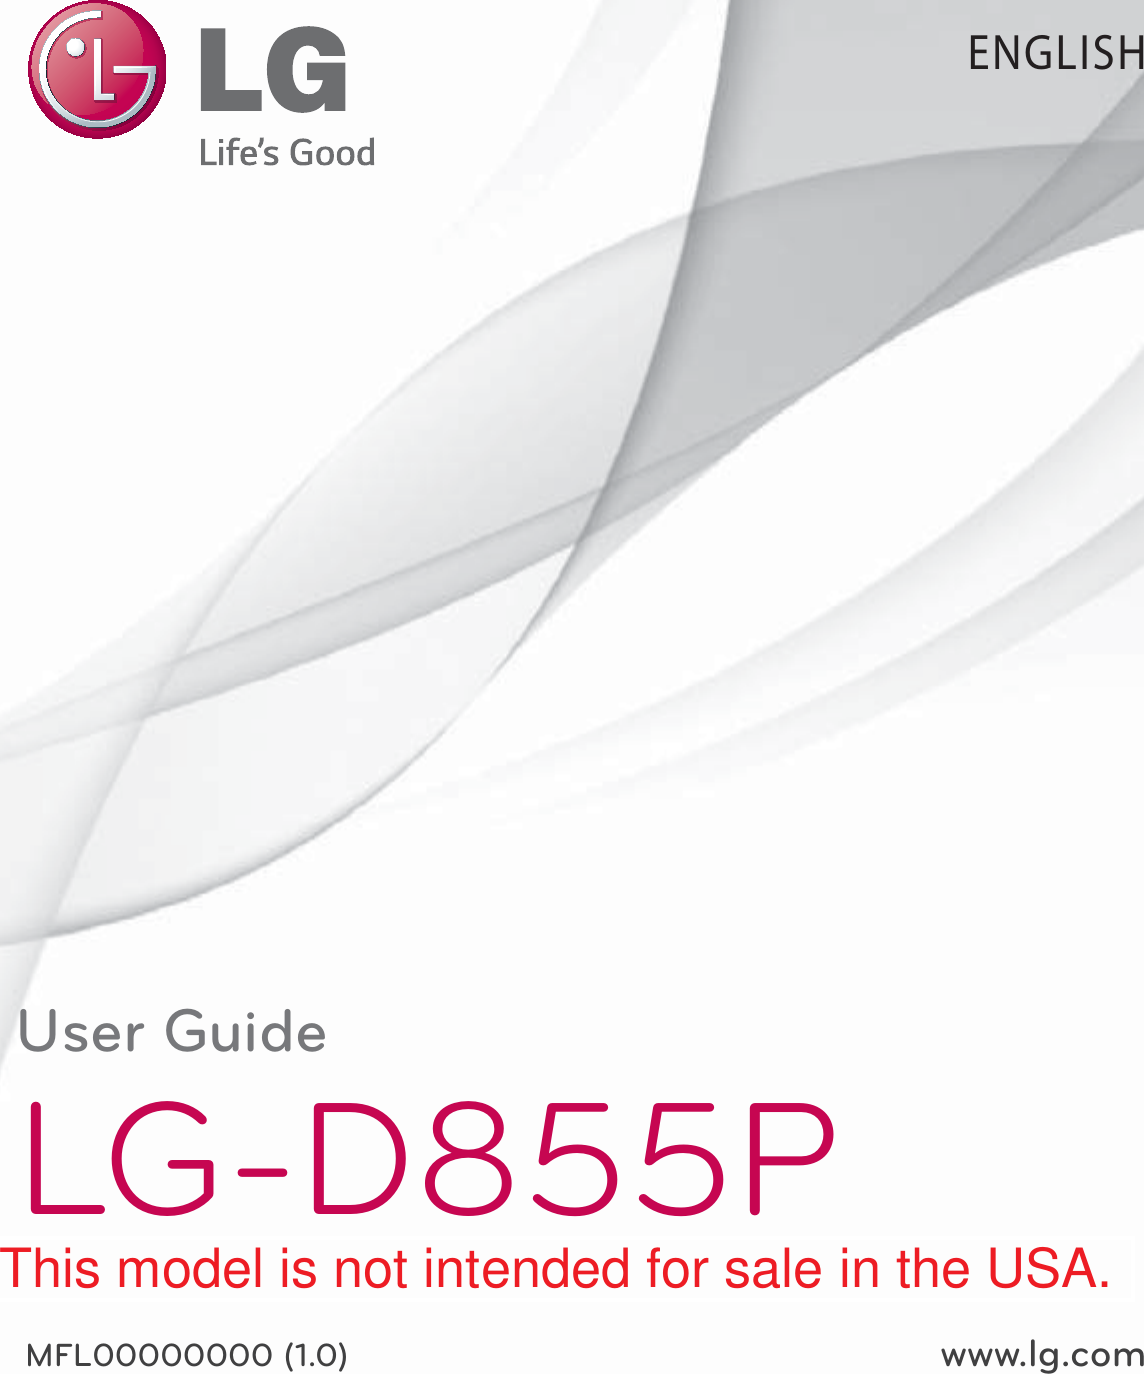 User GuideLG-D855PMFL00000000 (1.0)  www.lg.comENGLISHThis model is not intended for sale in the USA.